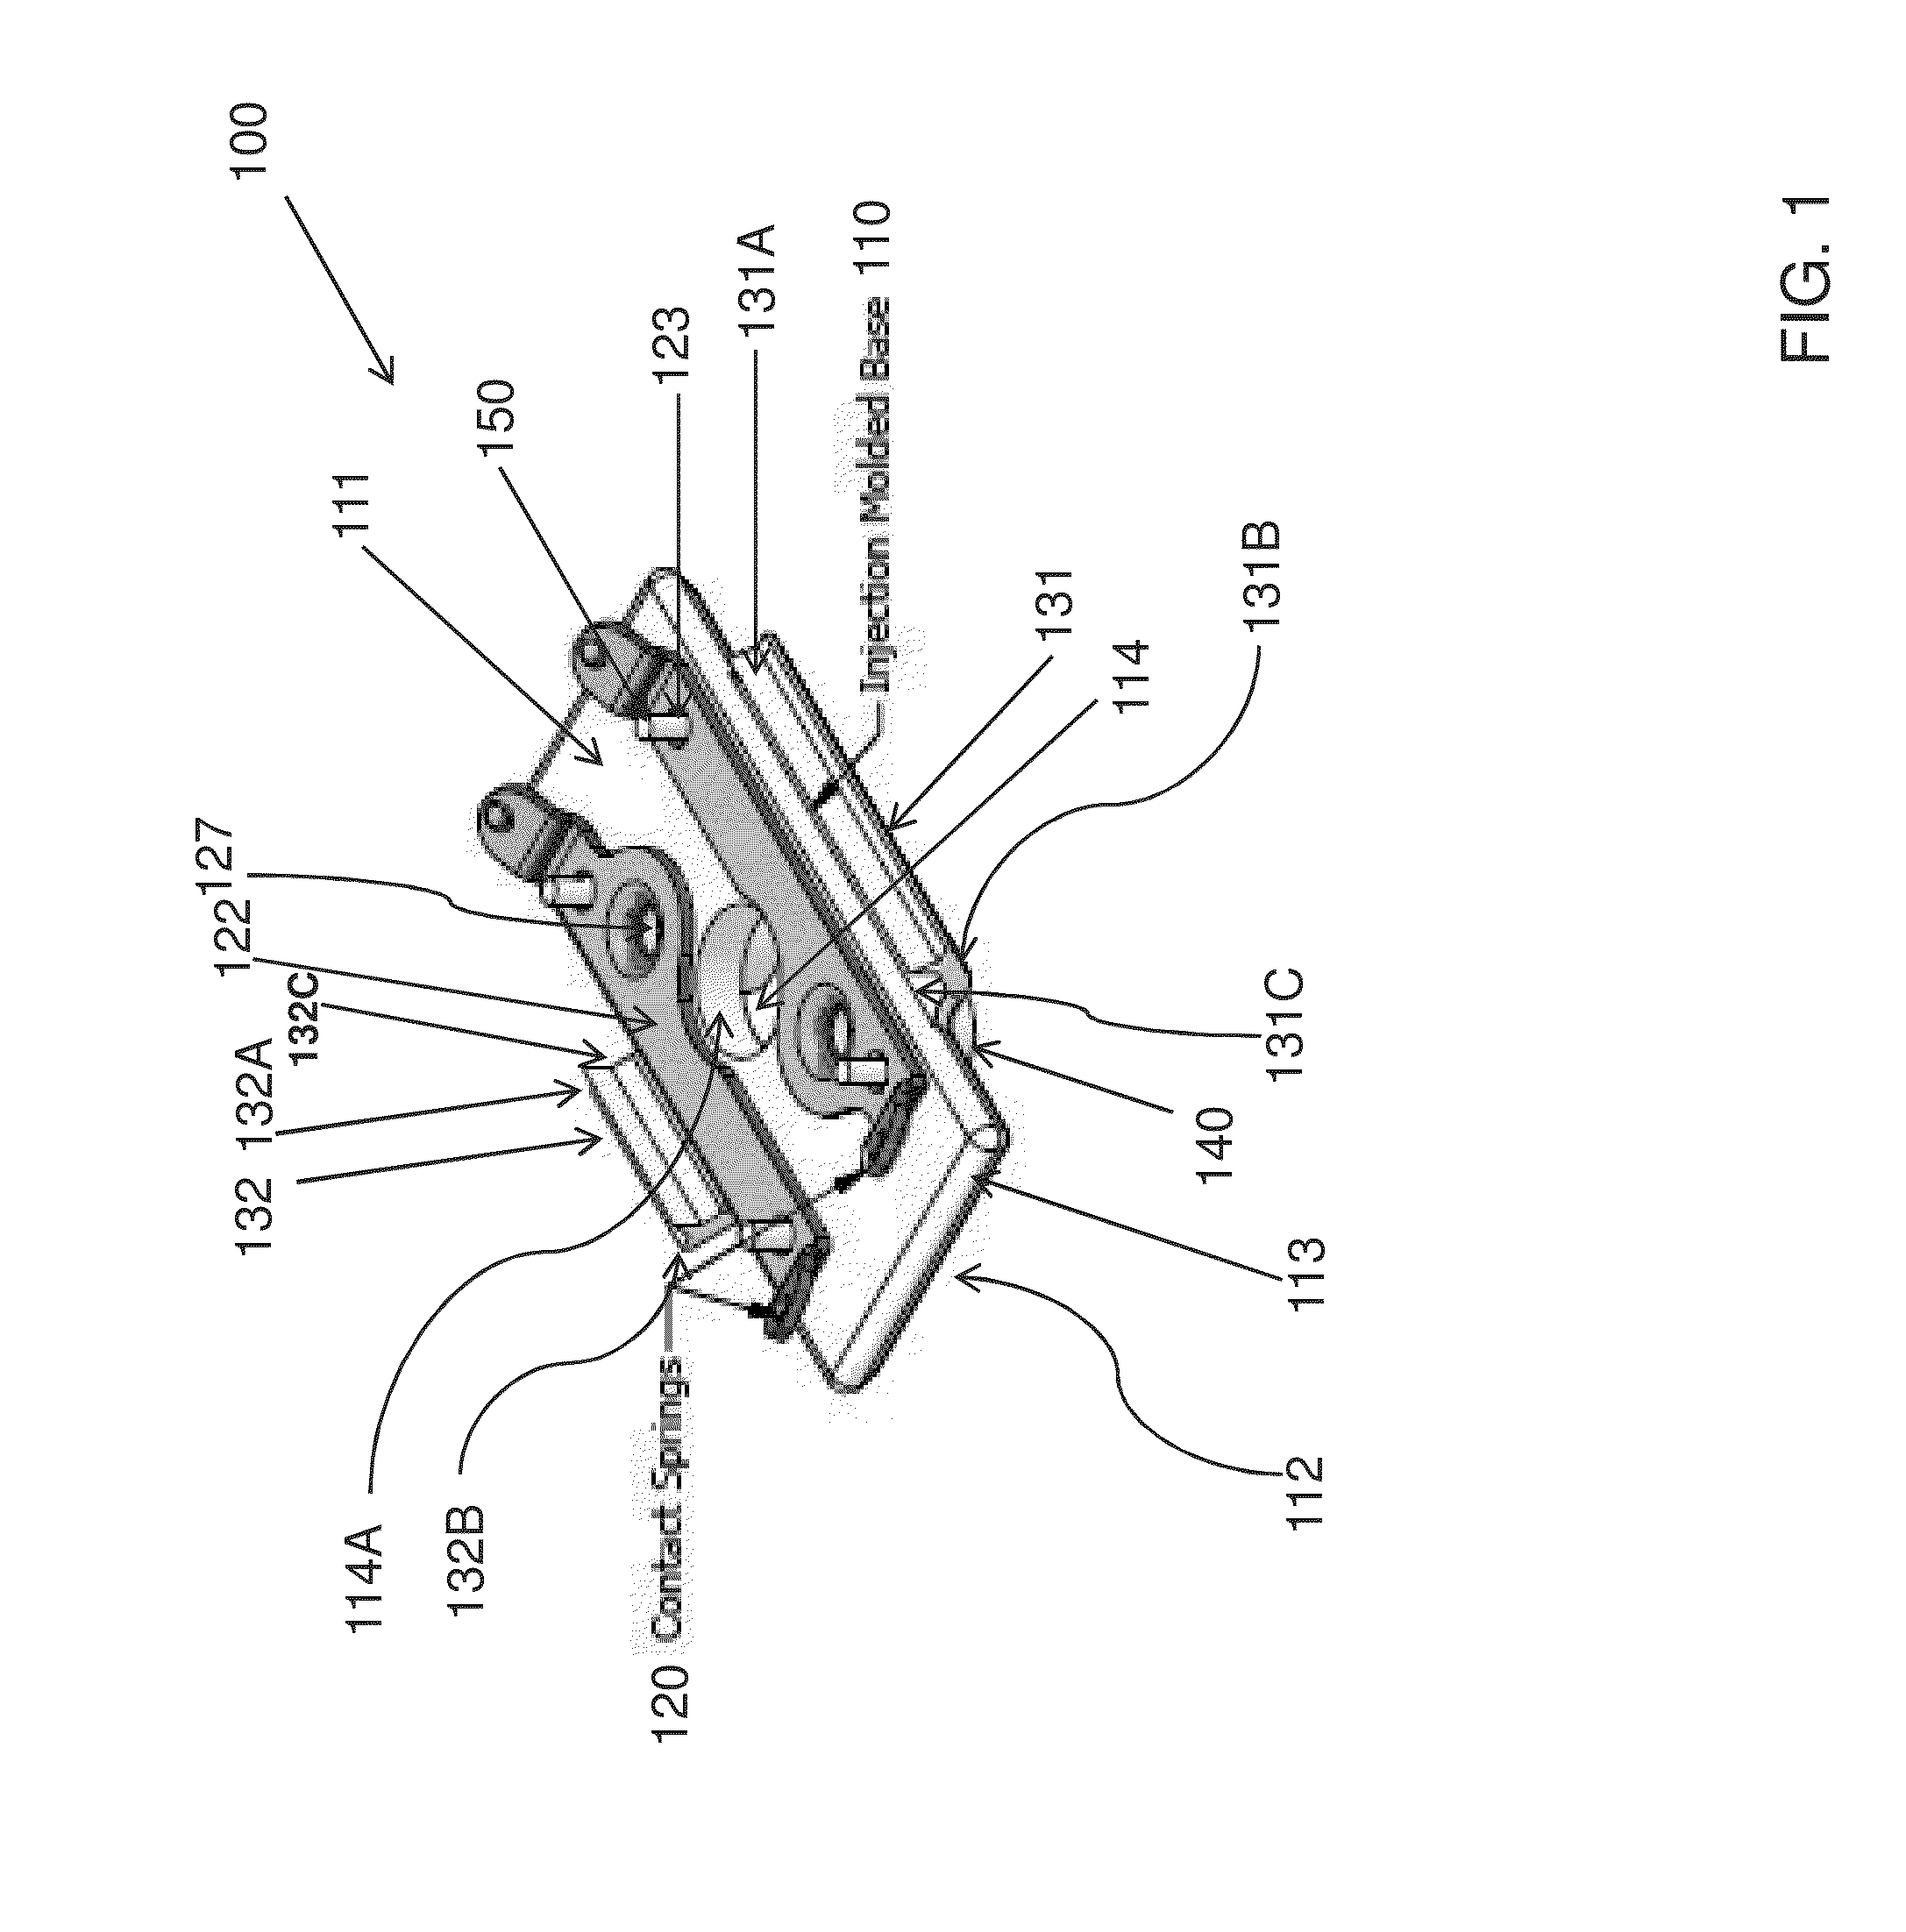 Systems and methods for assembling LED connector boards